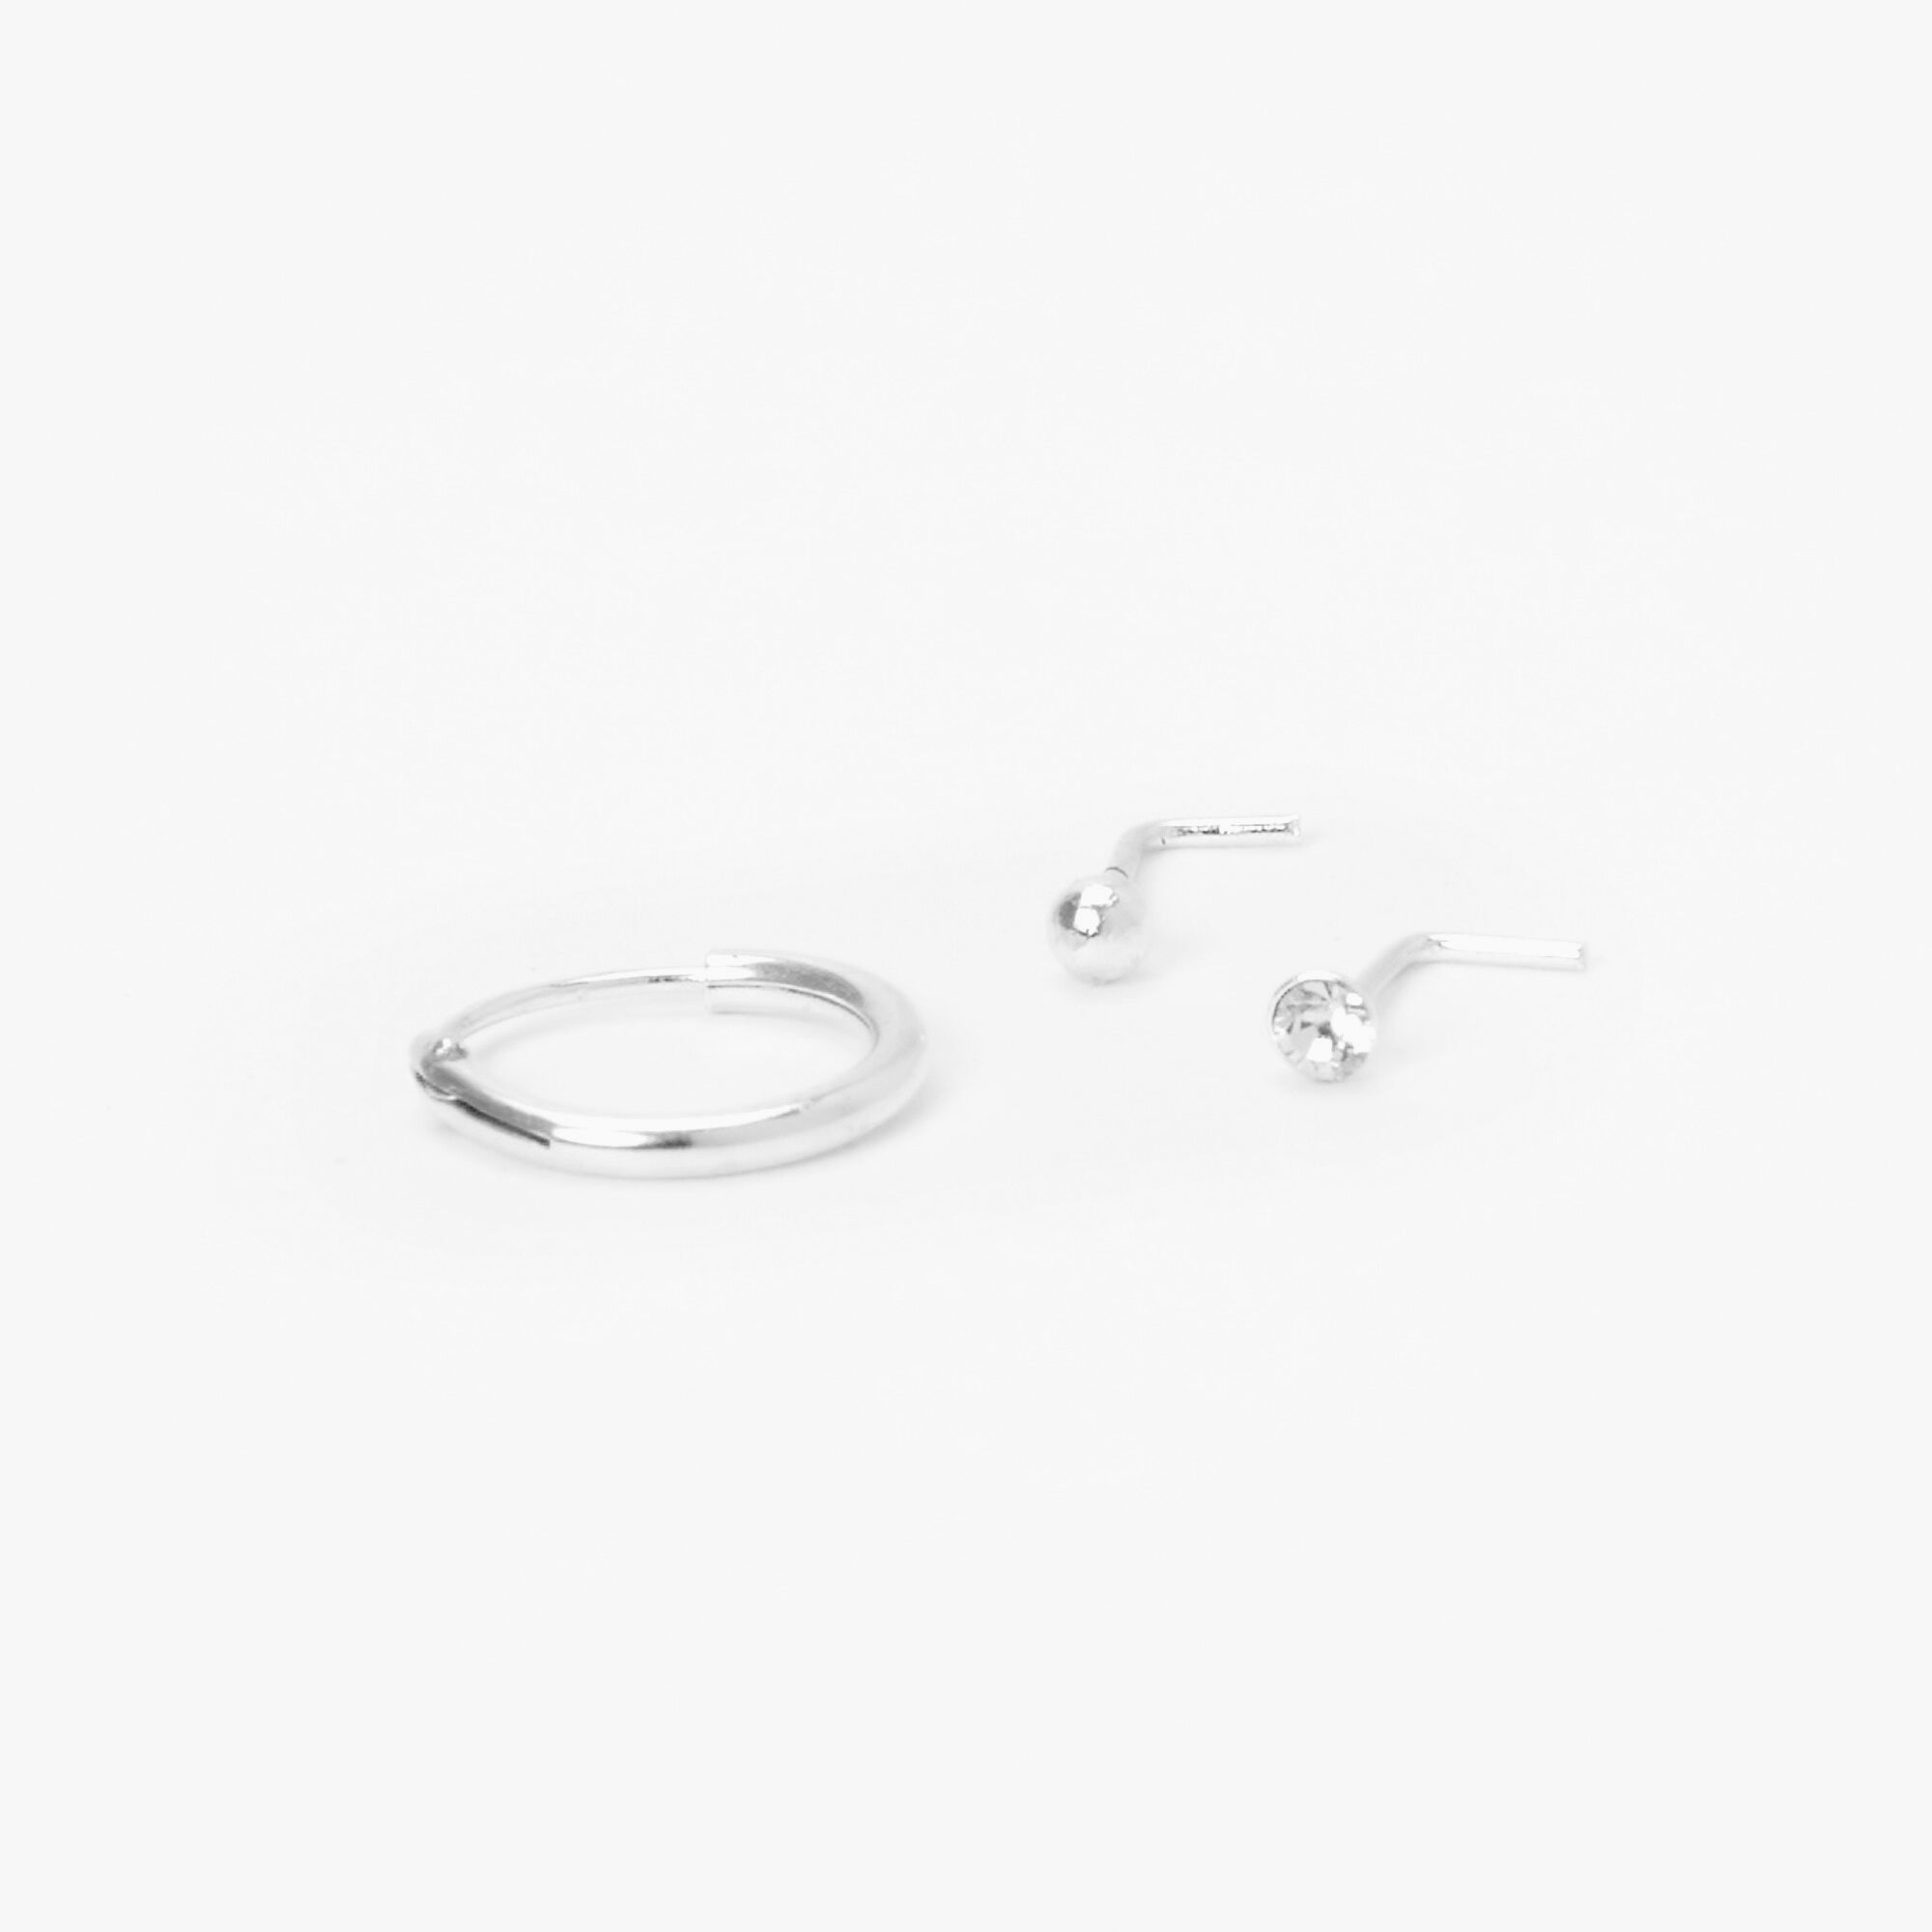 View Claires Tone 22G Nose Rings Studs Set 3 Pack Silver information